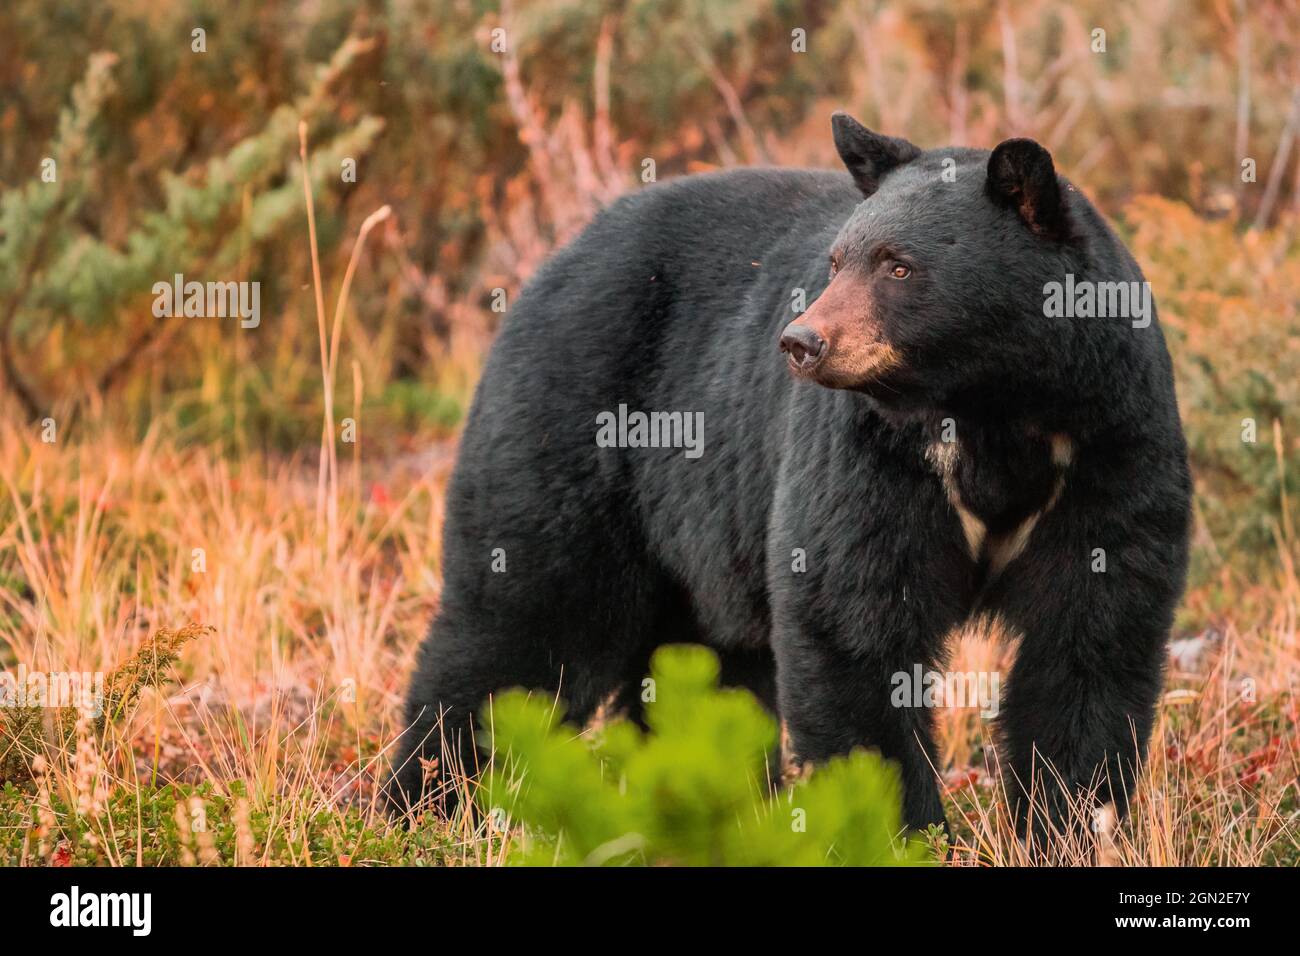 CANADA, ALBERTA, JASPER NATIONAL PARK. A BLACK BEAR (URSUS AMERICANUS) STOPPED IN THE FOREST OF JASPER PARK LOOKING INTO THE DISTANCE Stock Photo